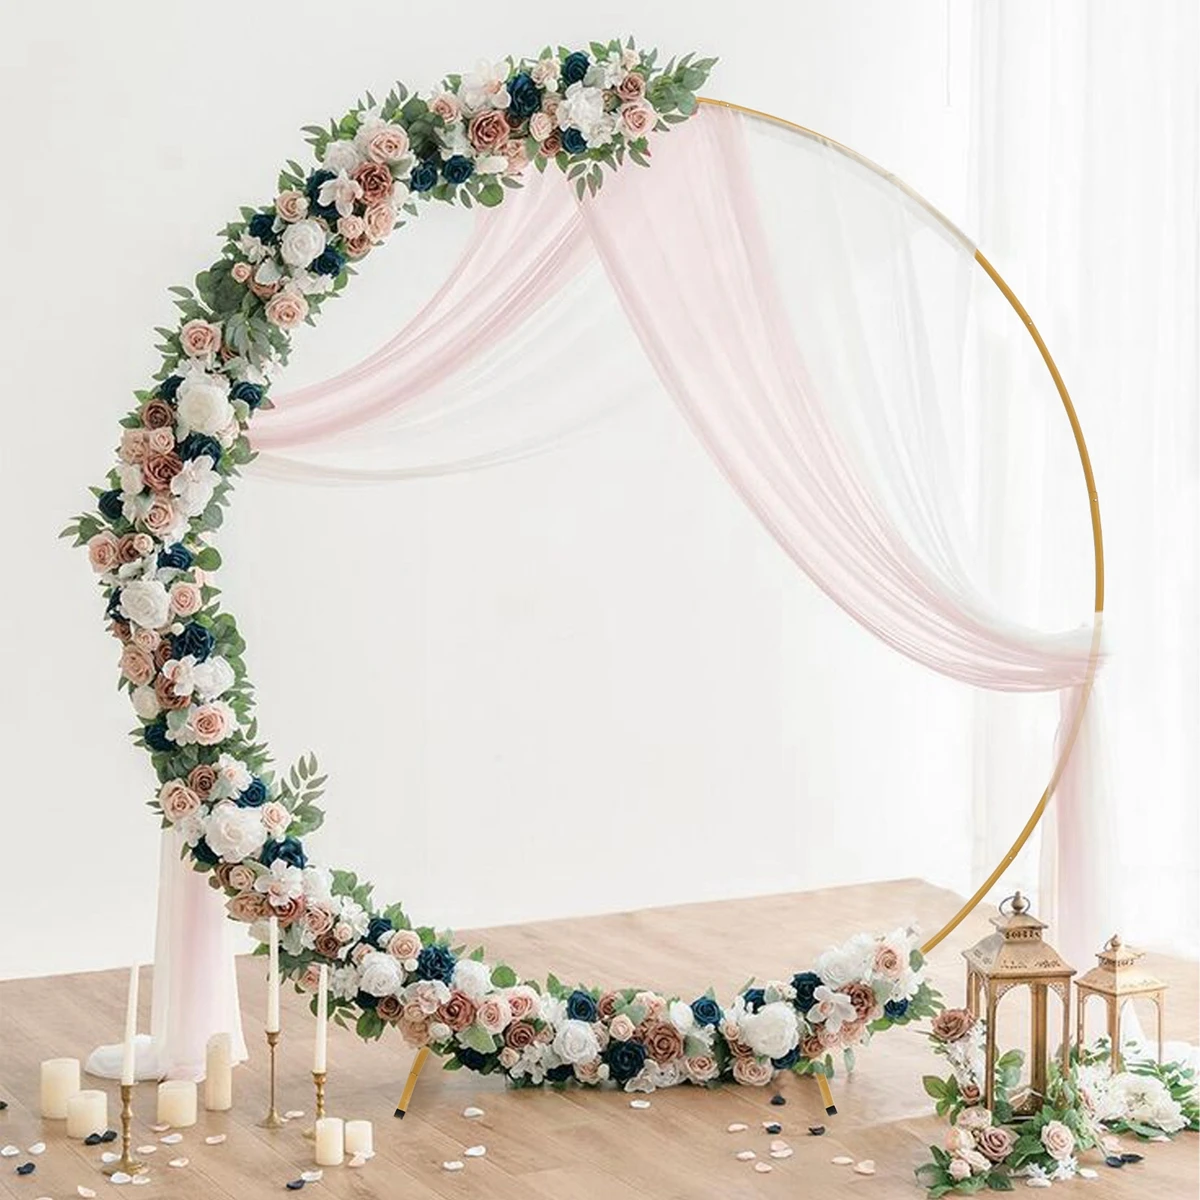 

Wedding Metal Arch Garland Rustic Round Backdrop Stand Wedding Party Favors Birthday Party Decoration Circle Balloon Arch Frame